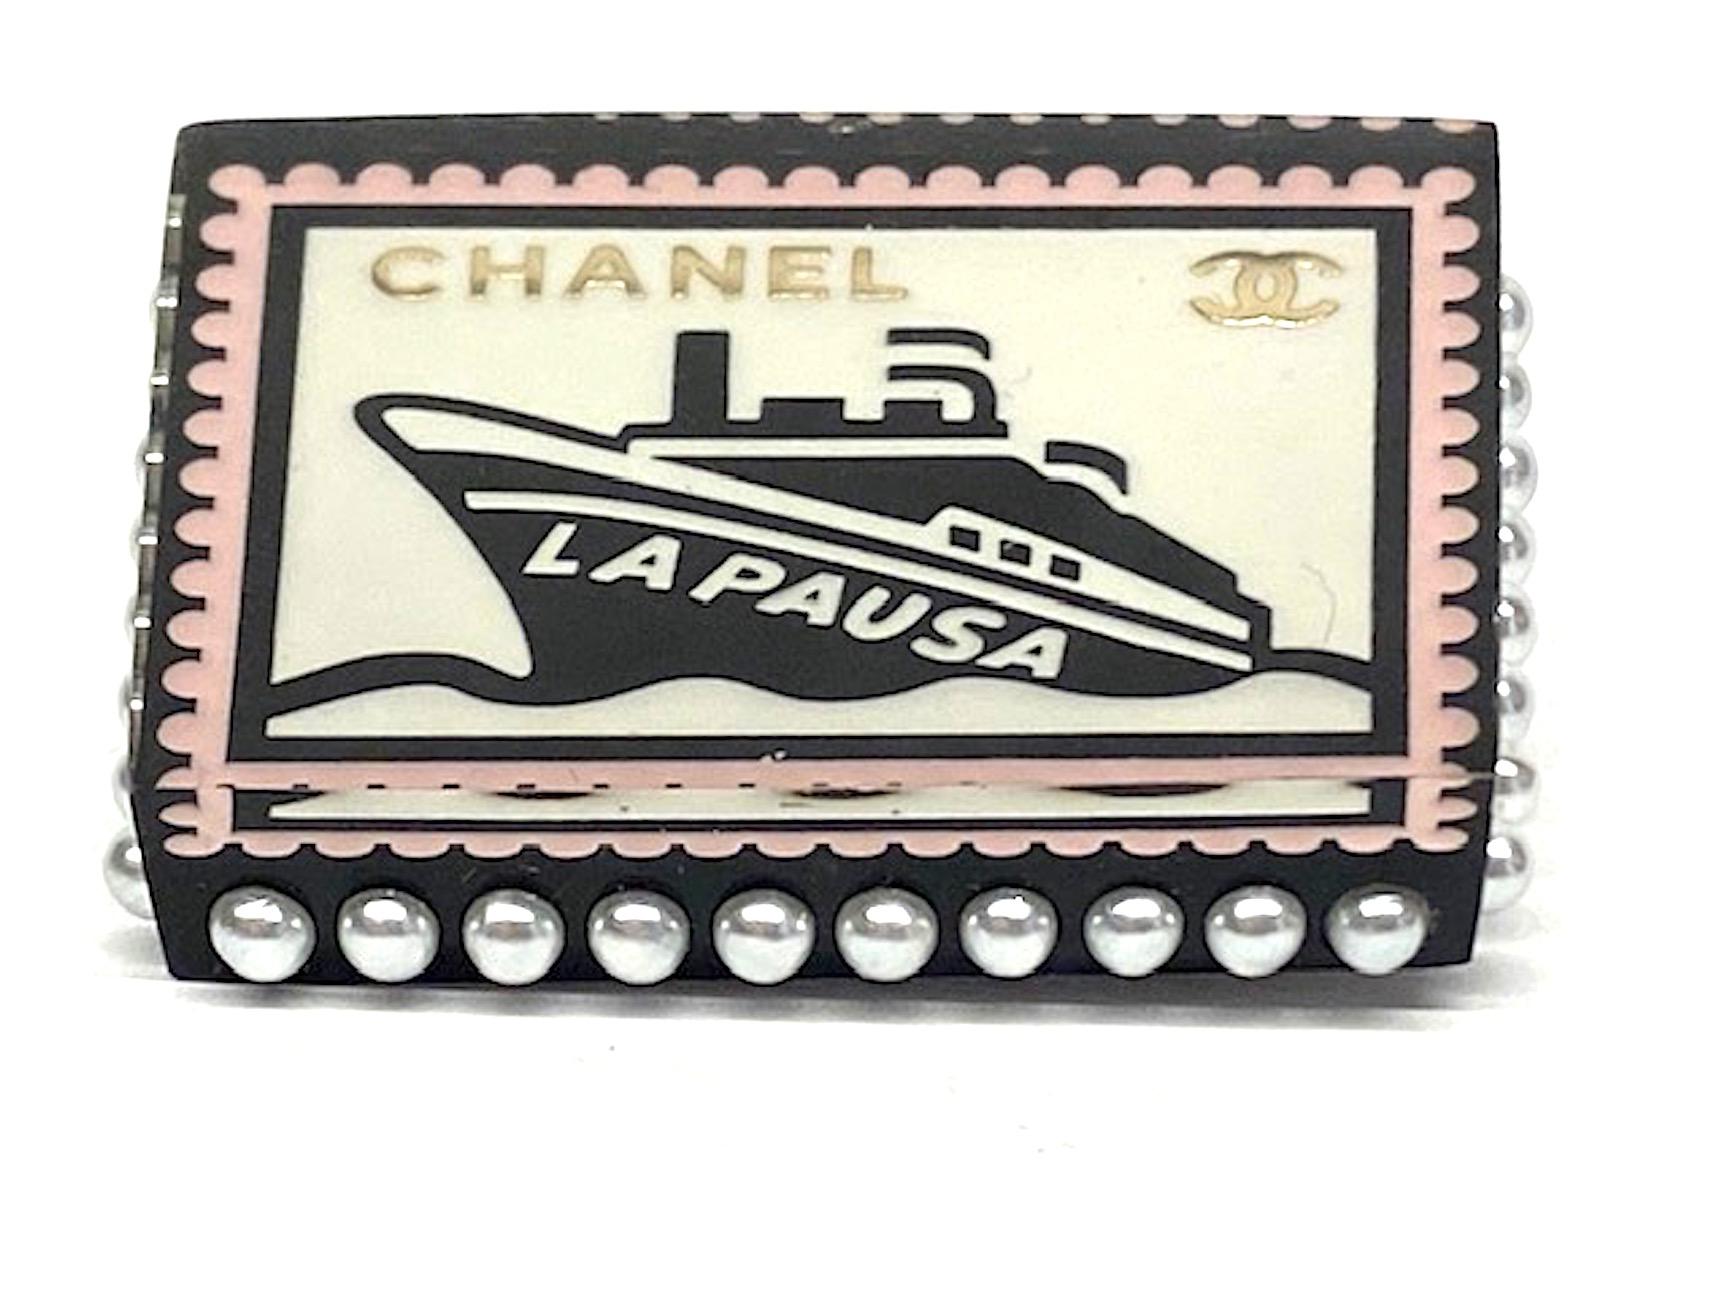 A charming Chanel lucite and faux pearl pin from the Spring 2018 collection. Bottom layer of pin is black lucite with sides set with faux pearls. Top is clear lucite. Sandwiched in-between is a black and white image of a cruise ship with 